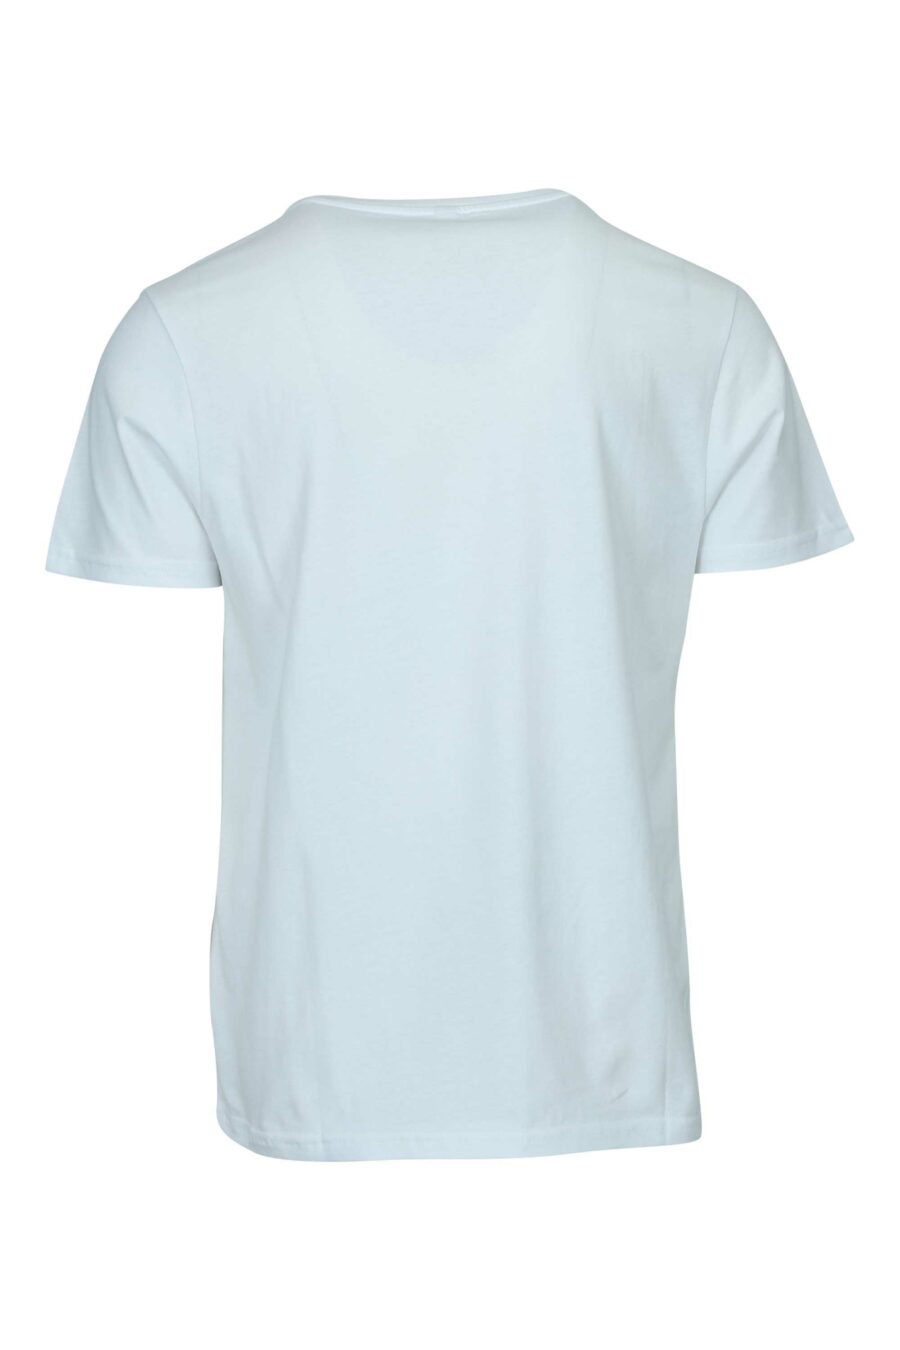 White T-shirt with monochrome rubber logo on shoulders - 667113671932 1